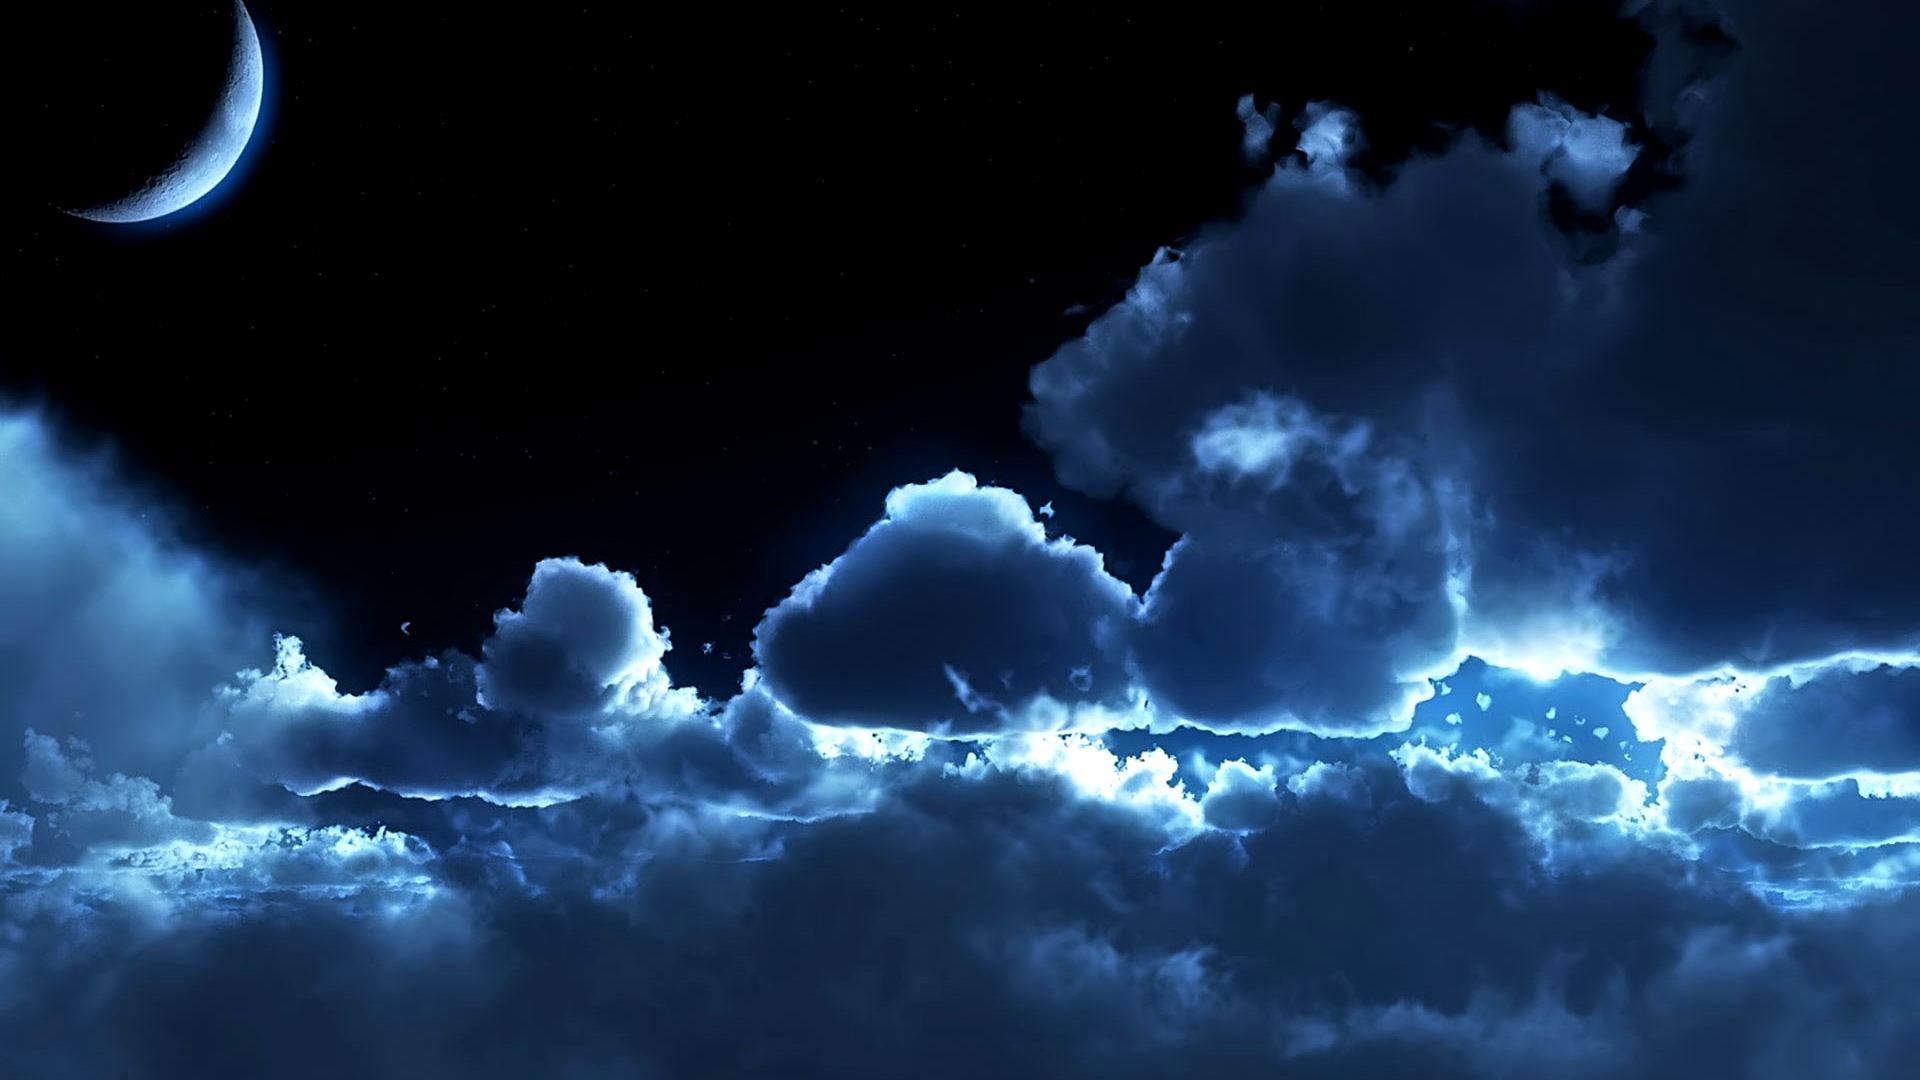 Most Popular Hd Wallpapers Hd Wallpapers , Hd Backgrounds,tumblr - Moonlight Above The Clouds - HD Wallpaper 